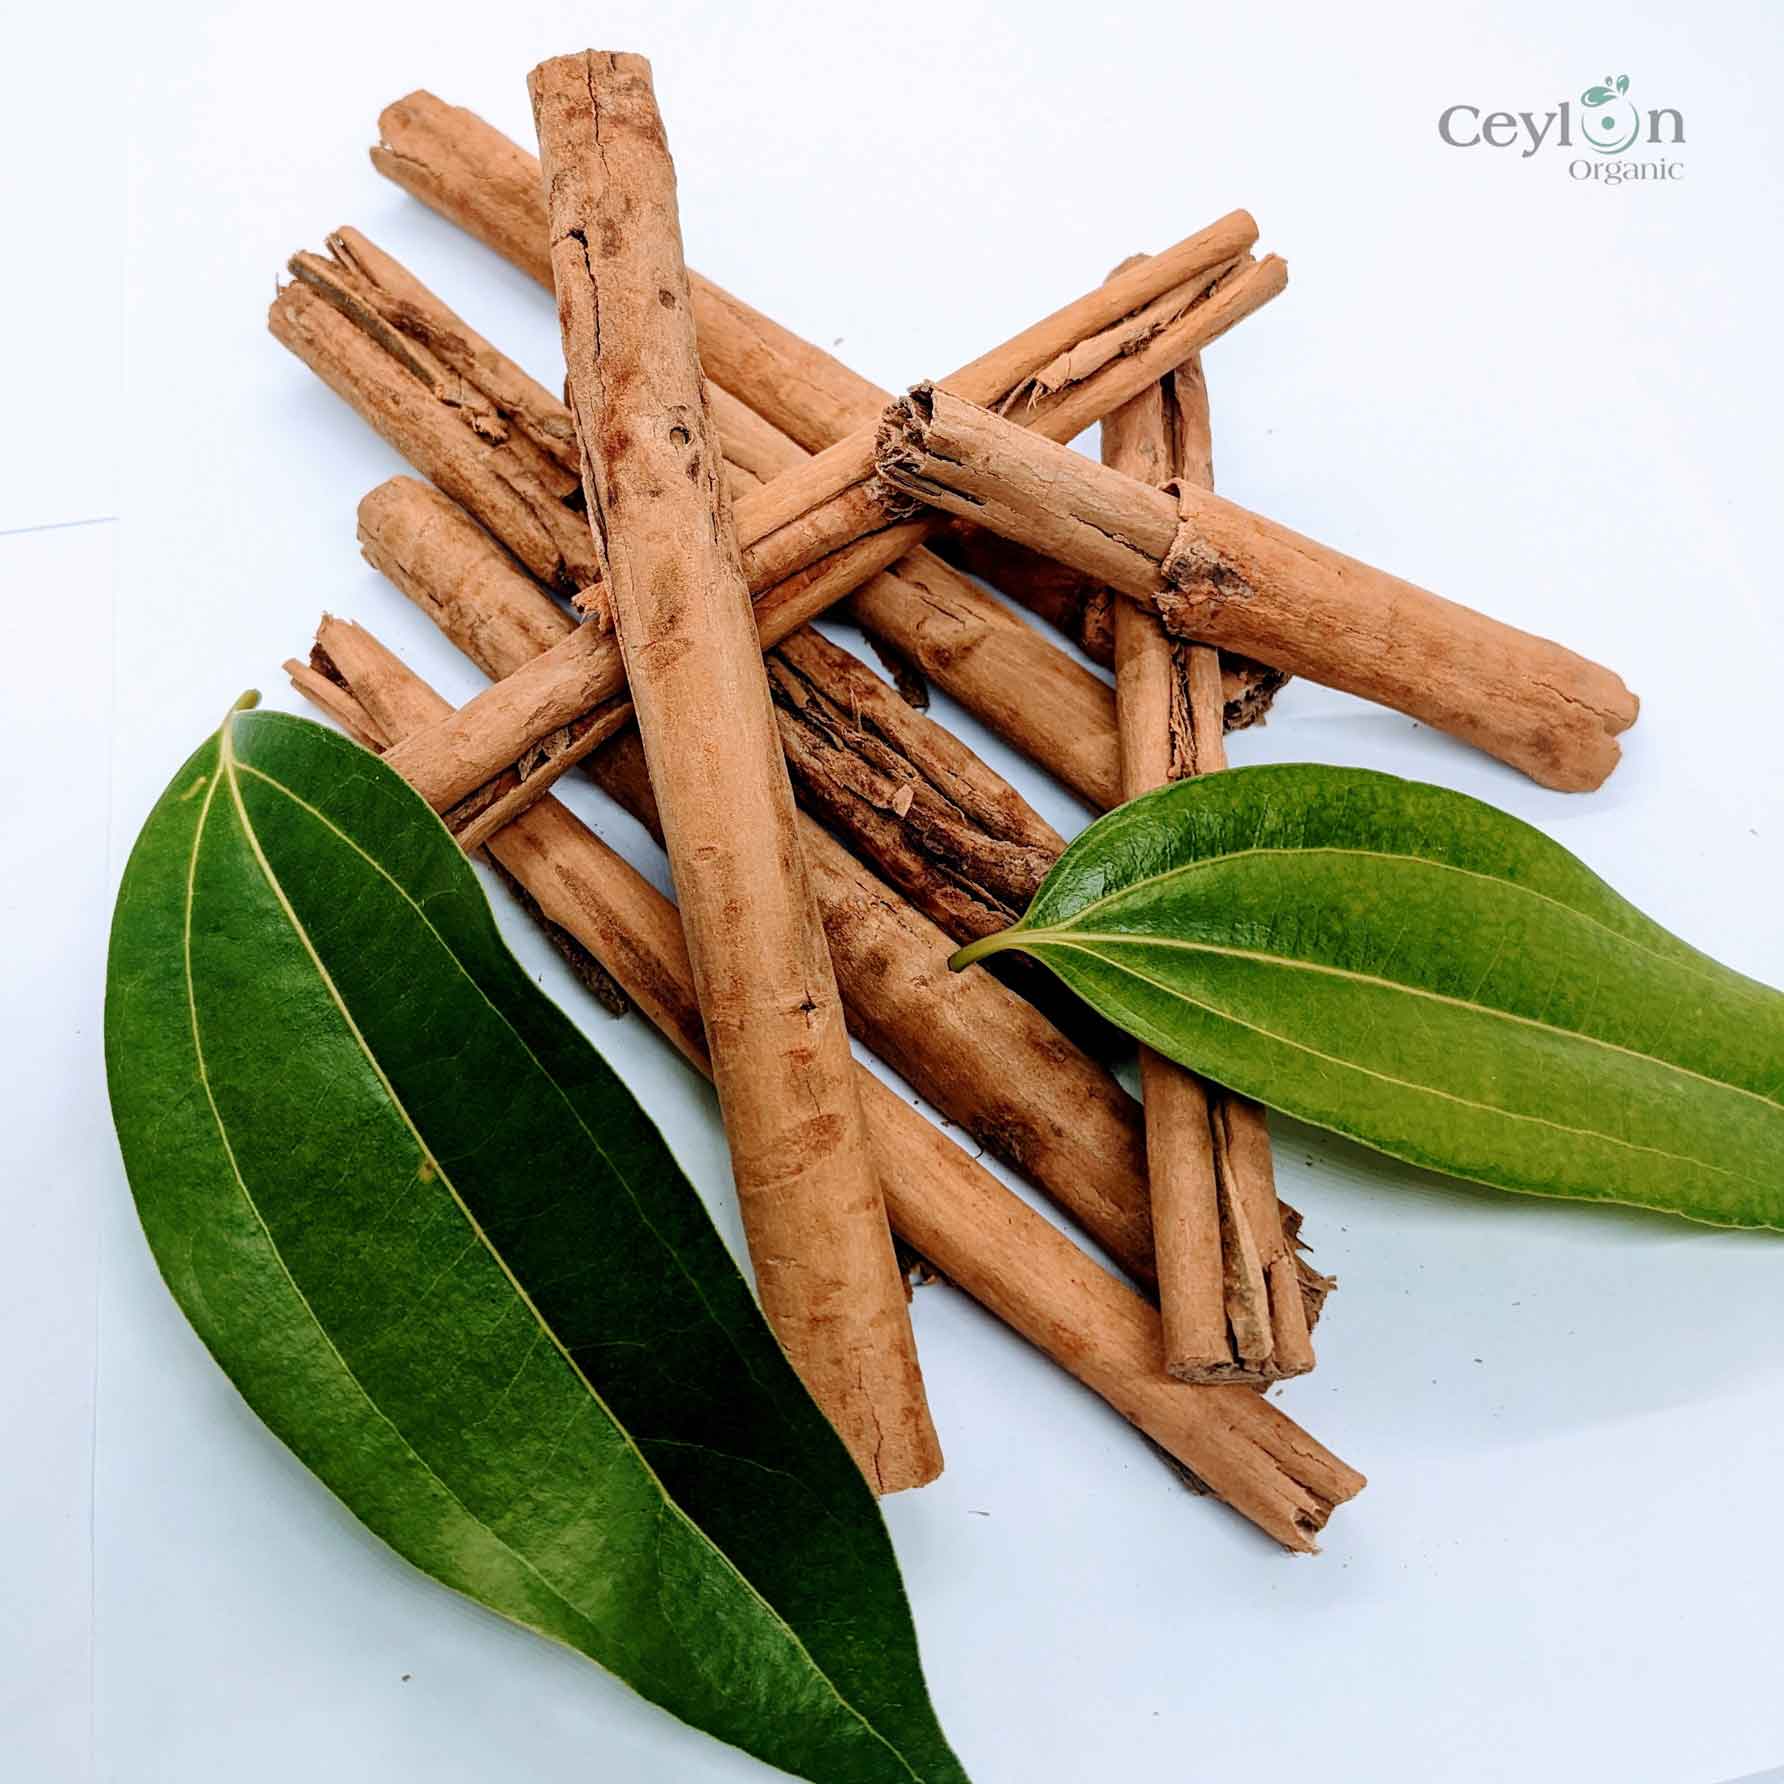 2kg+ Cinnamon Sticks - The Perfect Spice for Baking, Cooking, and Tea | Ceylon Organic-1